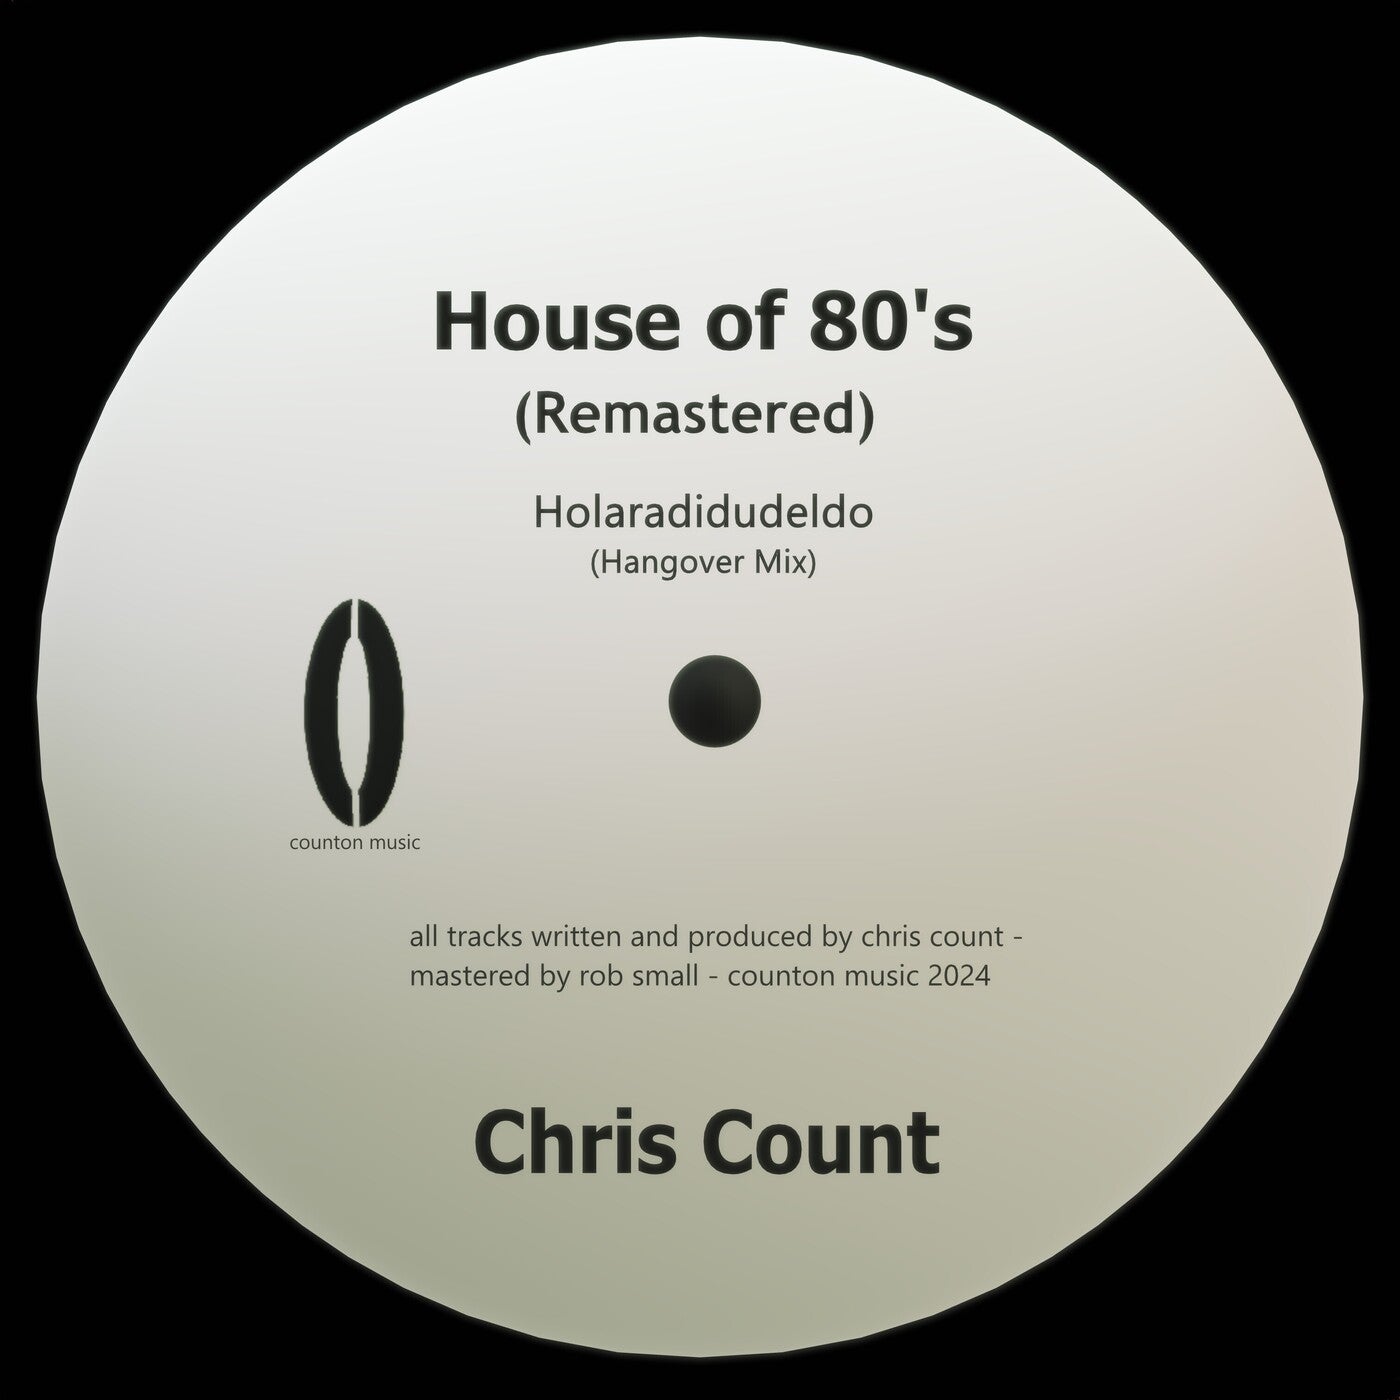 House of 80's